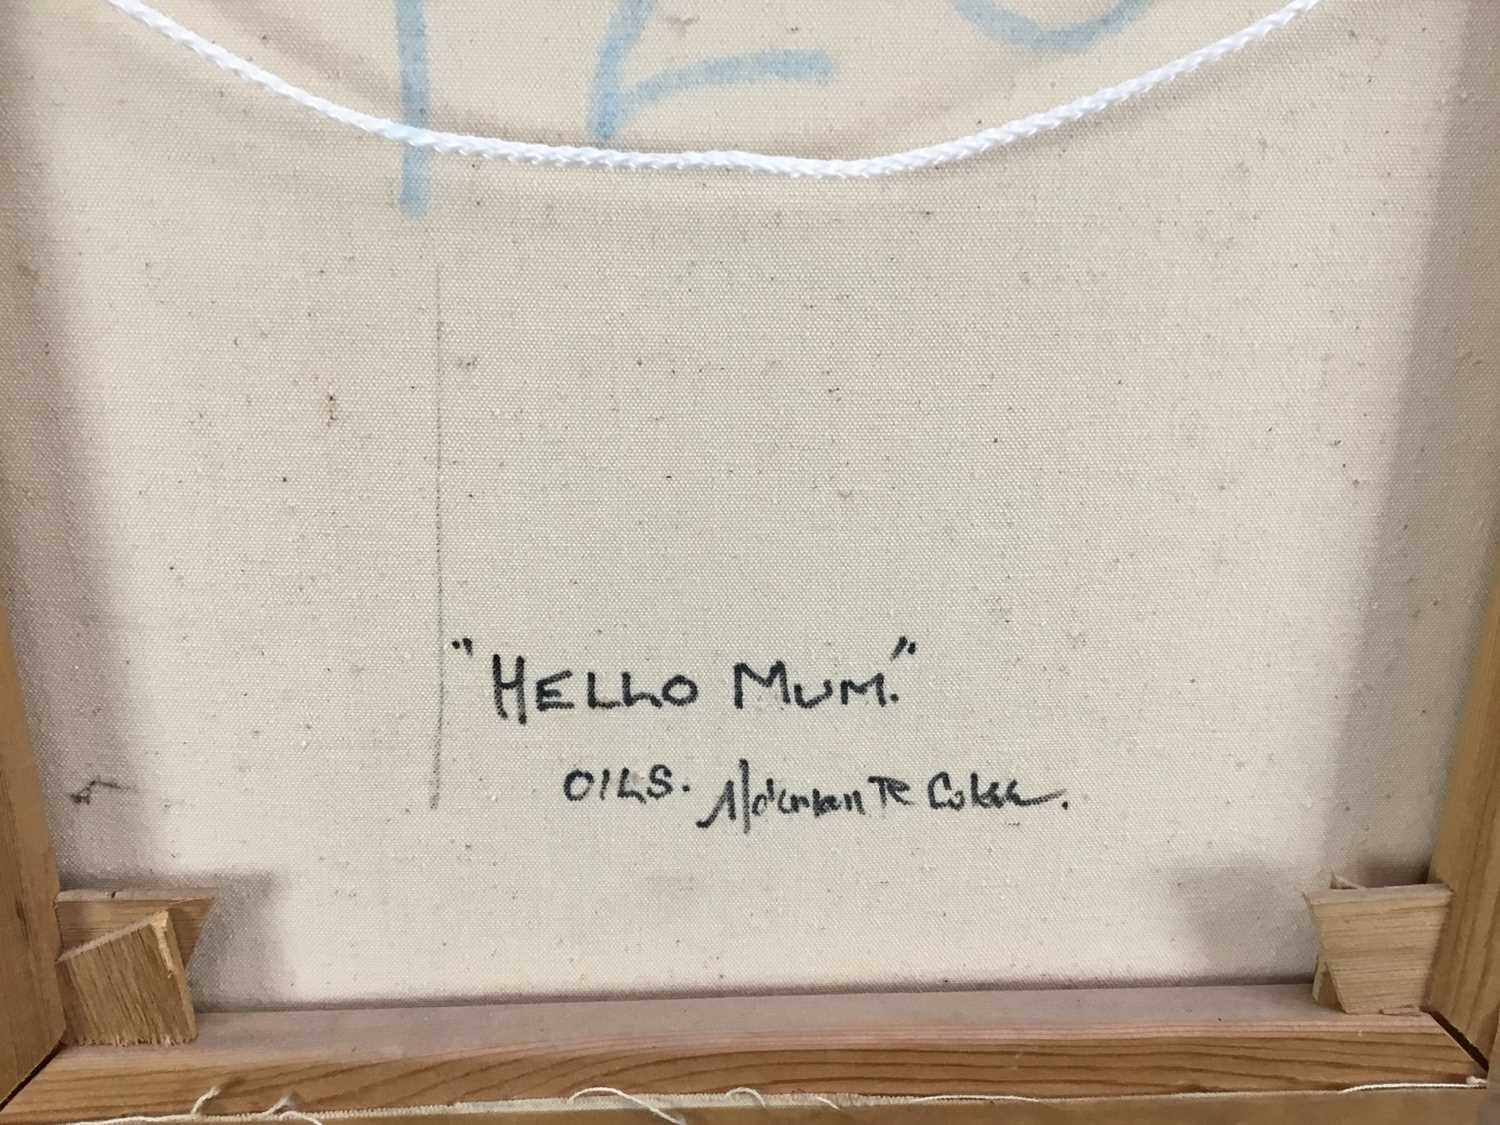 Norman Coker, contemporary, oil on canvas, 'Hello Mum', signed, titled verso, 44 x 36cm, framed - Image 4 of 6